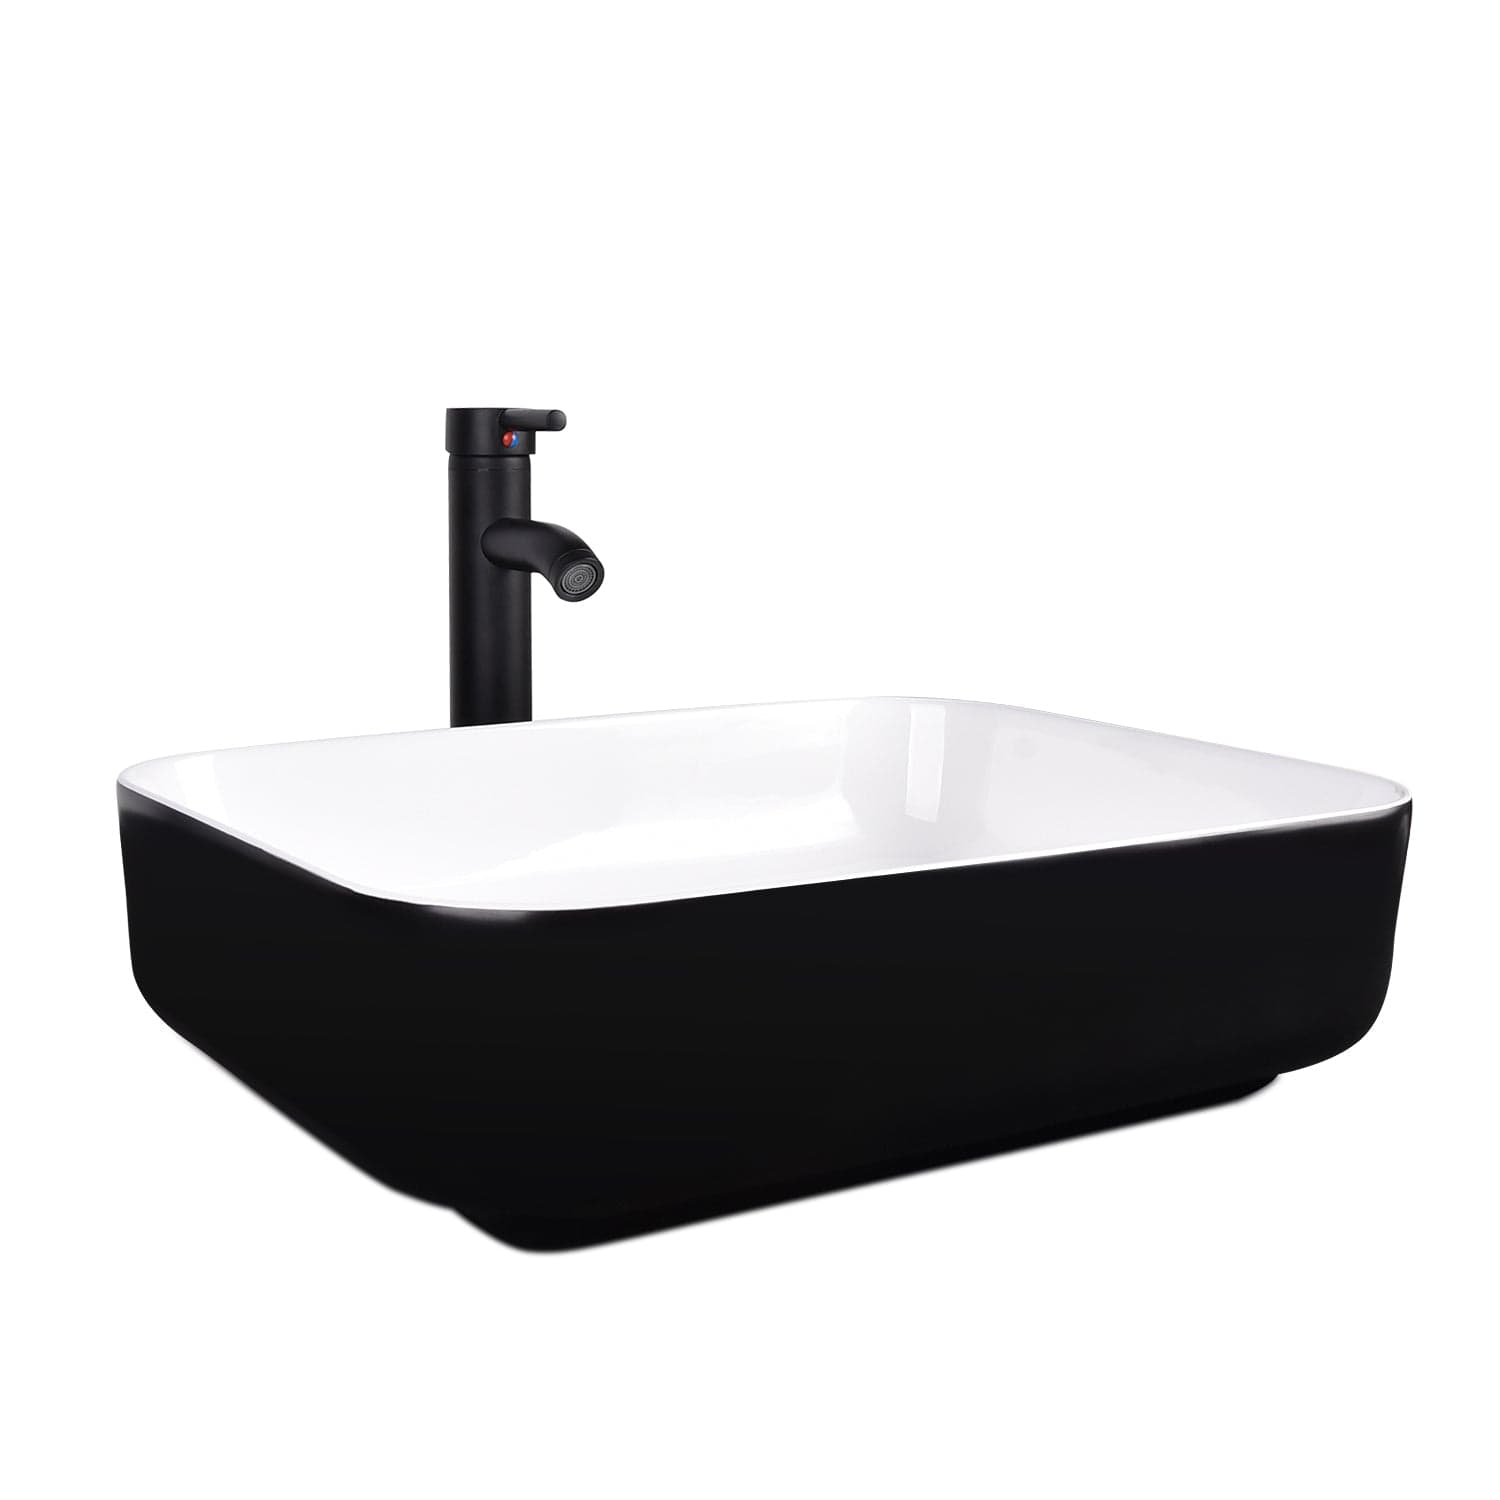 Elecwish Vessel Sinks Black and White Ceramic Bathroom Sink Faucet and Drain Combo,Rectangle